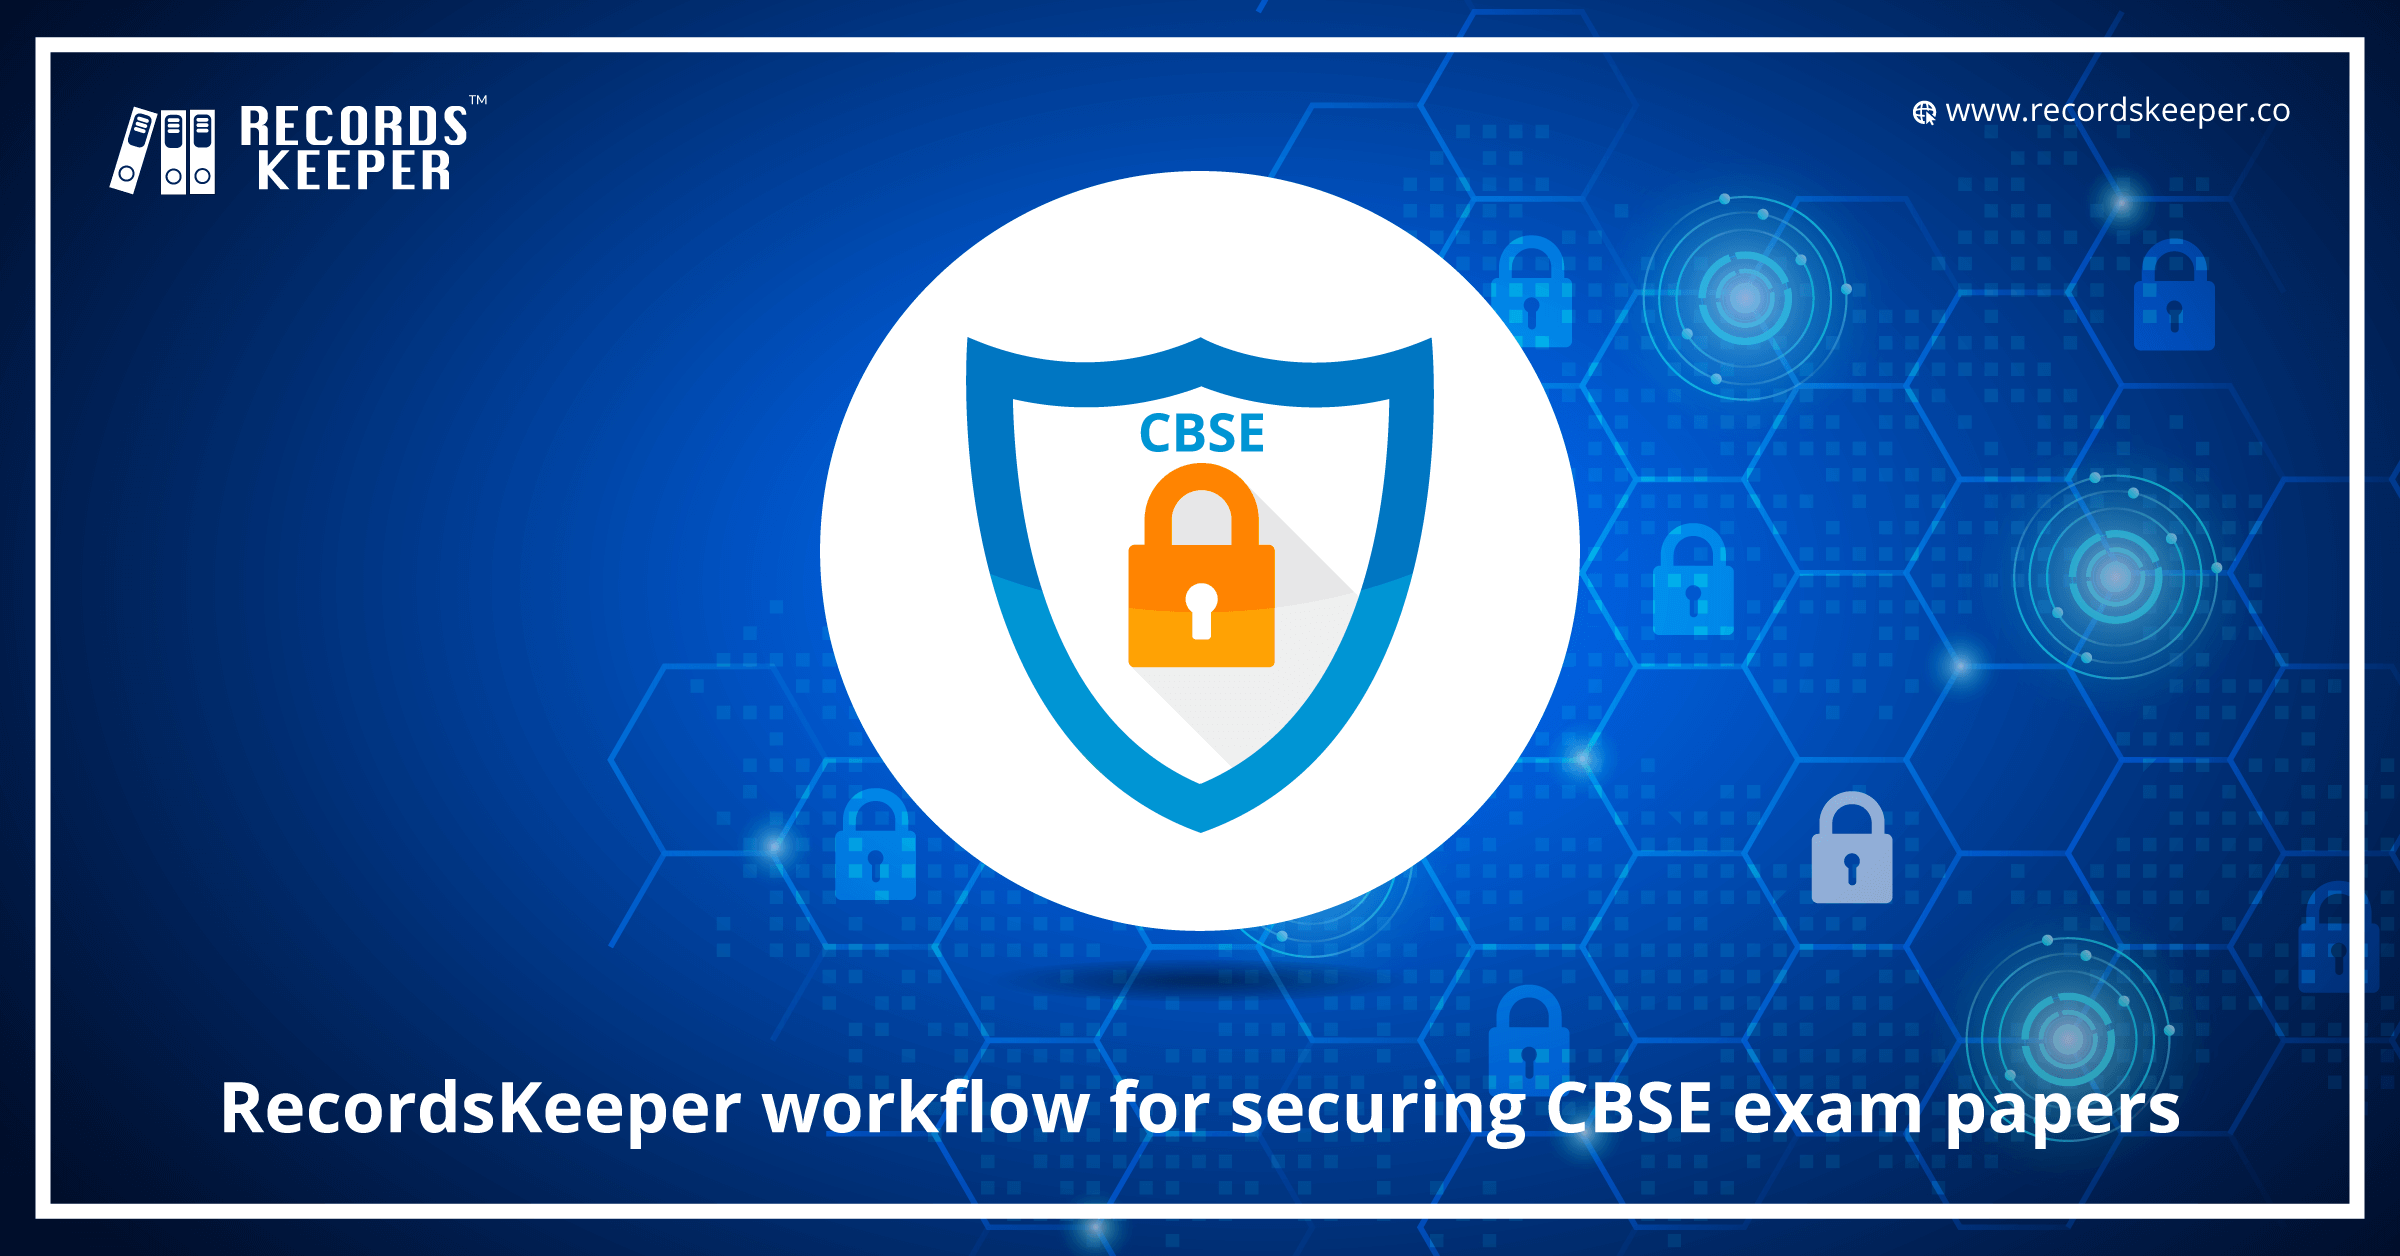 How RecordsKeeper Blockchain Can Help in Preventing CBSE Exam Leak